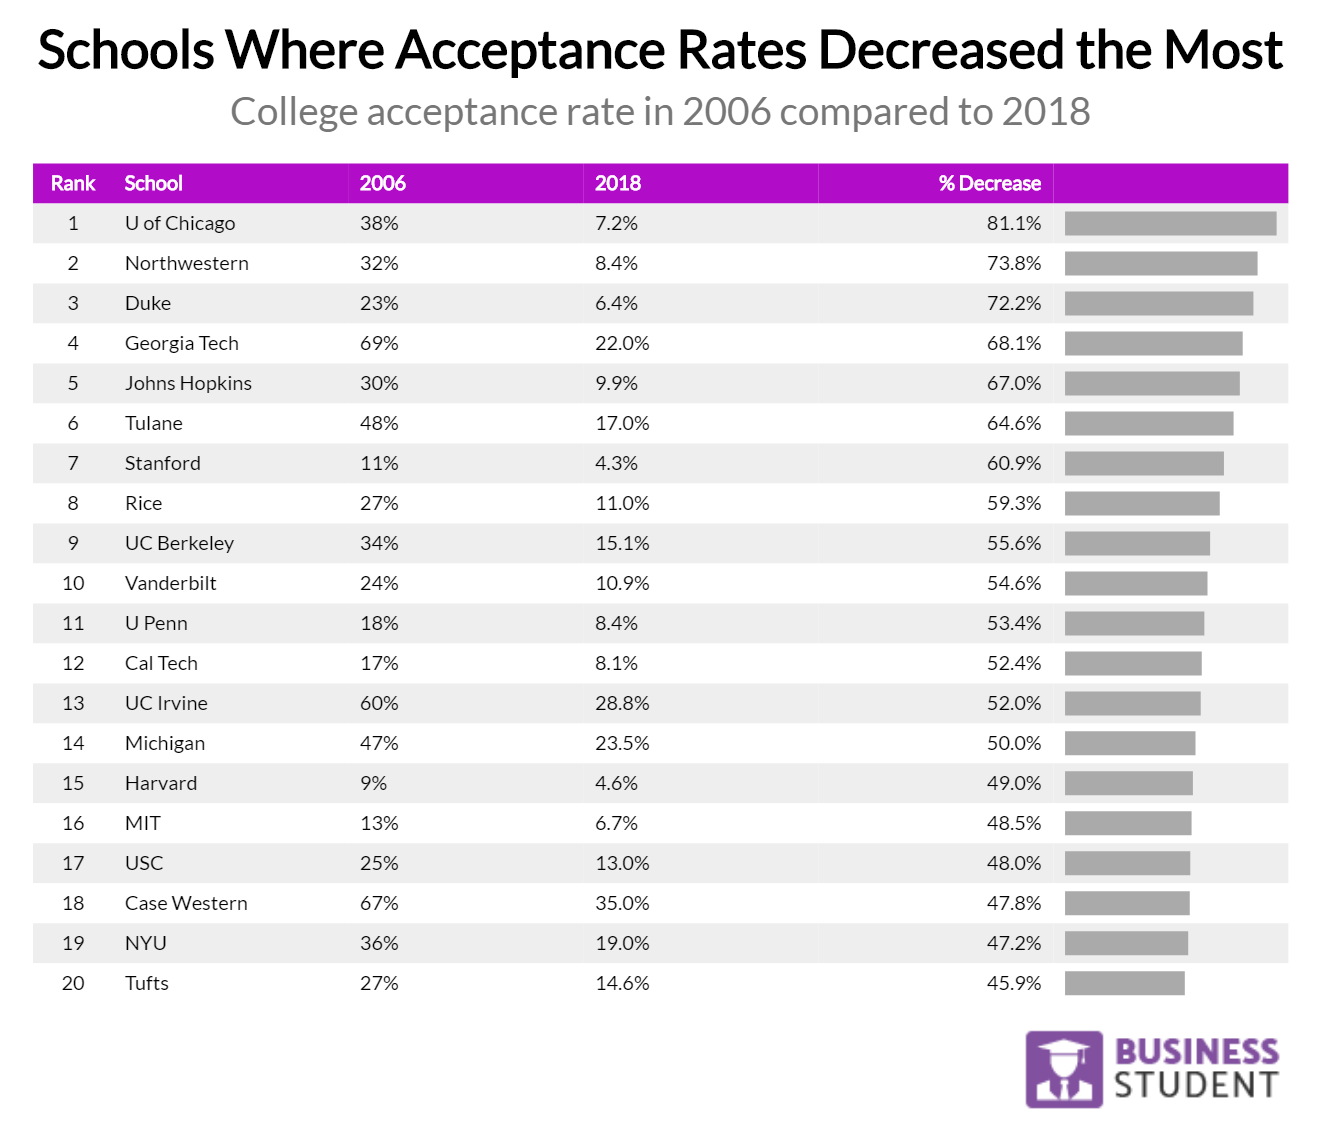 Schools Where Acceptance Rates Decreased The Most 2018 09 21T19 02 44.644Z 